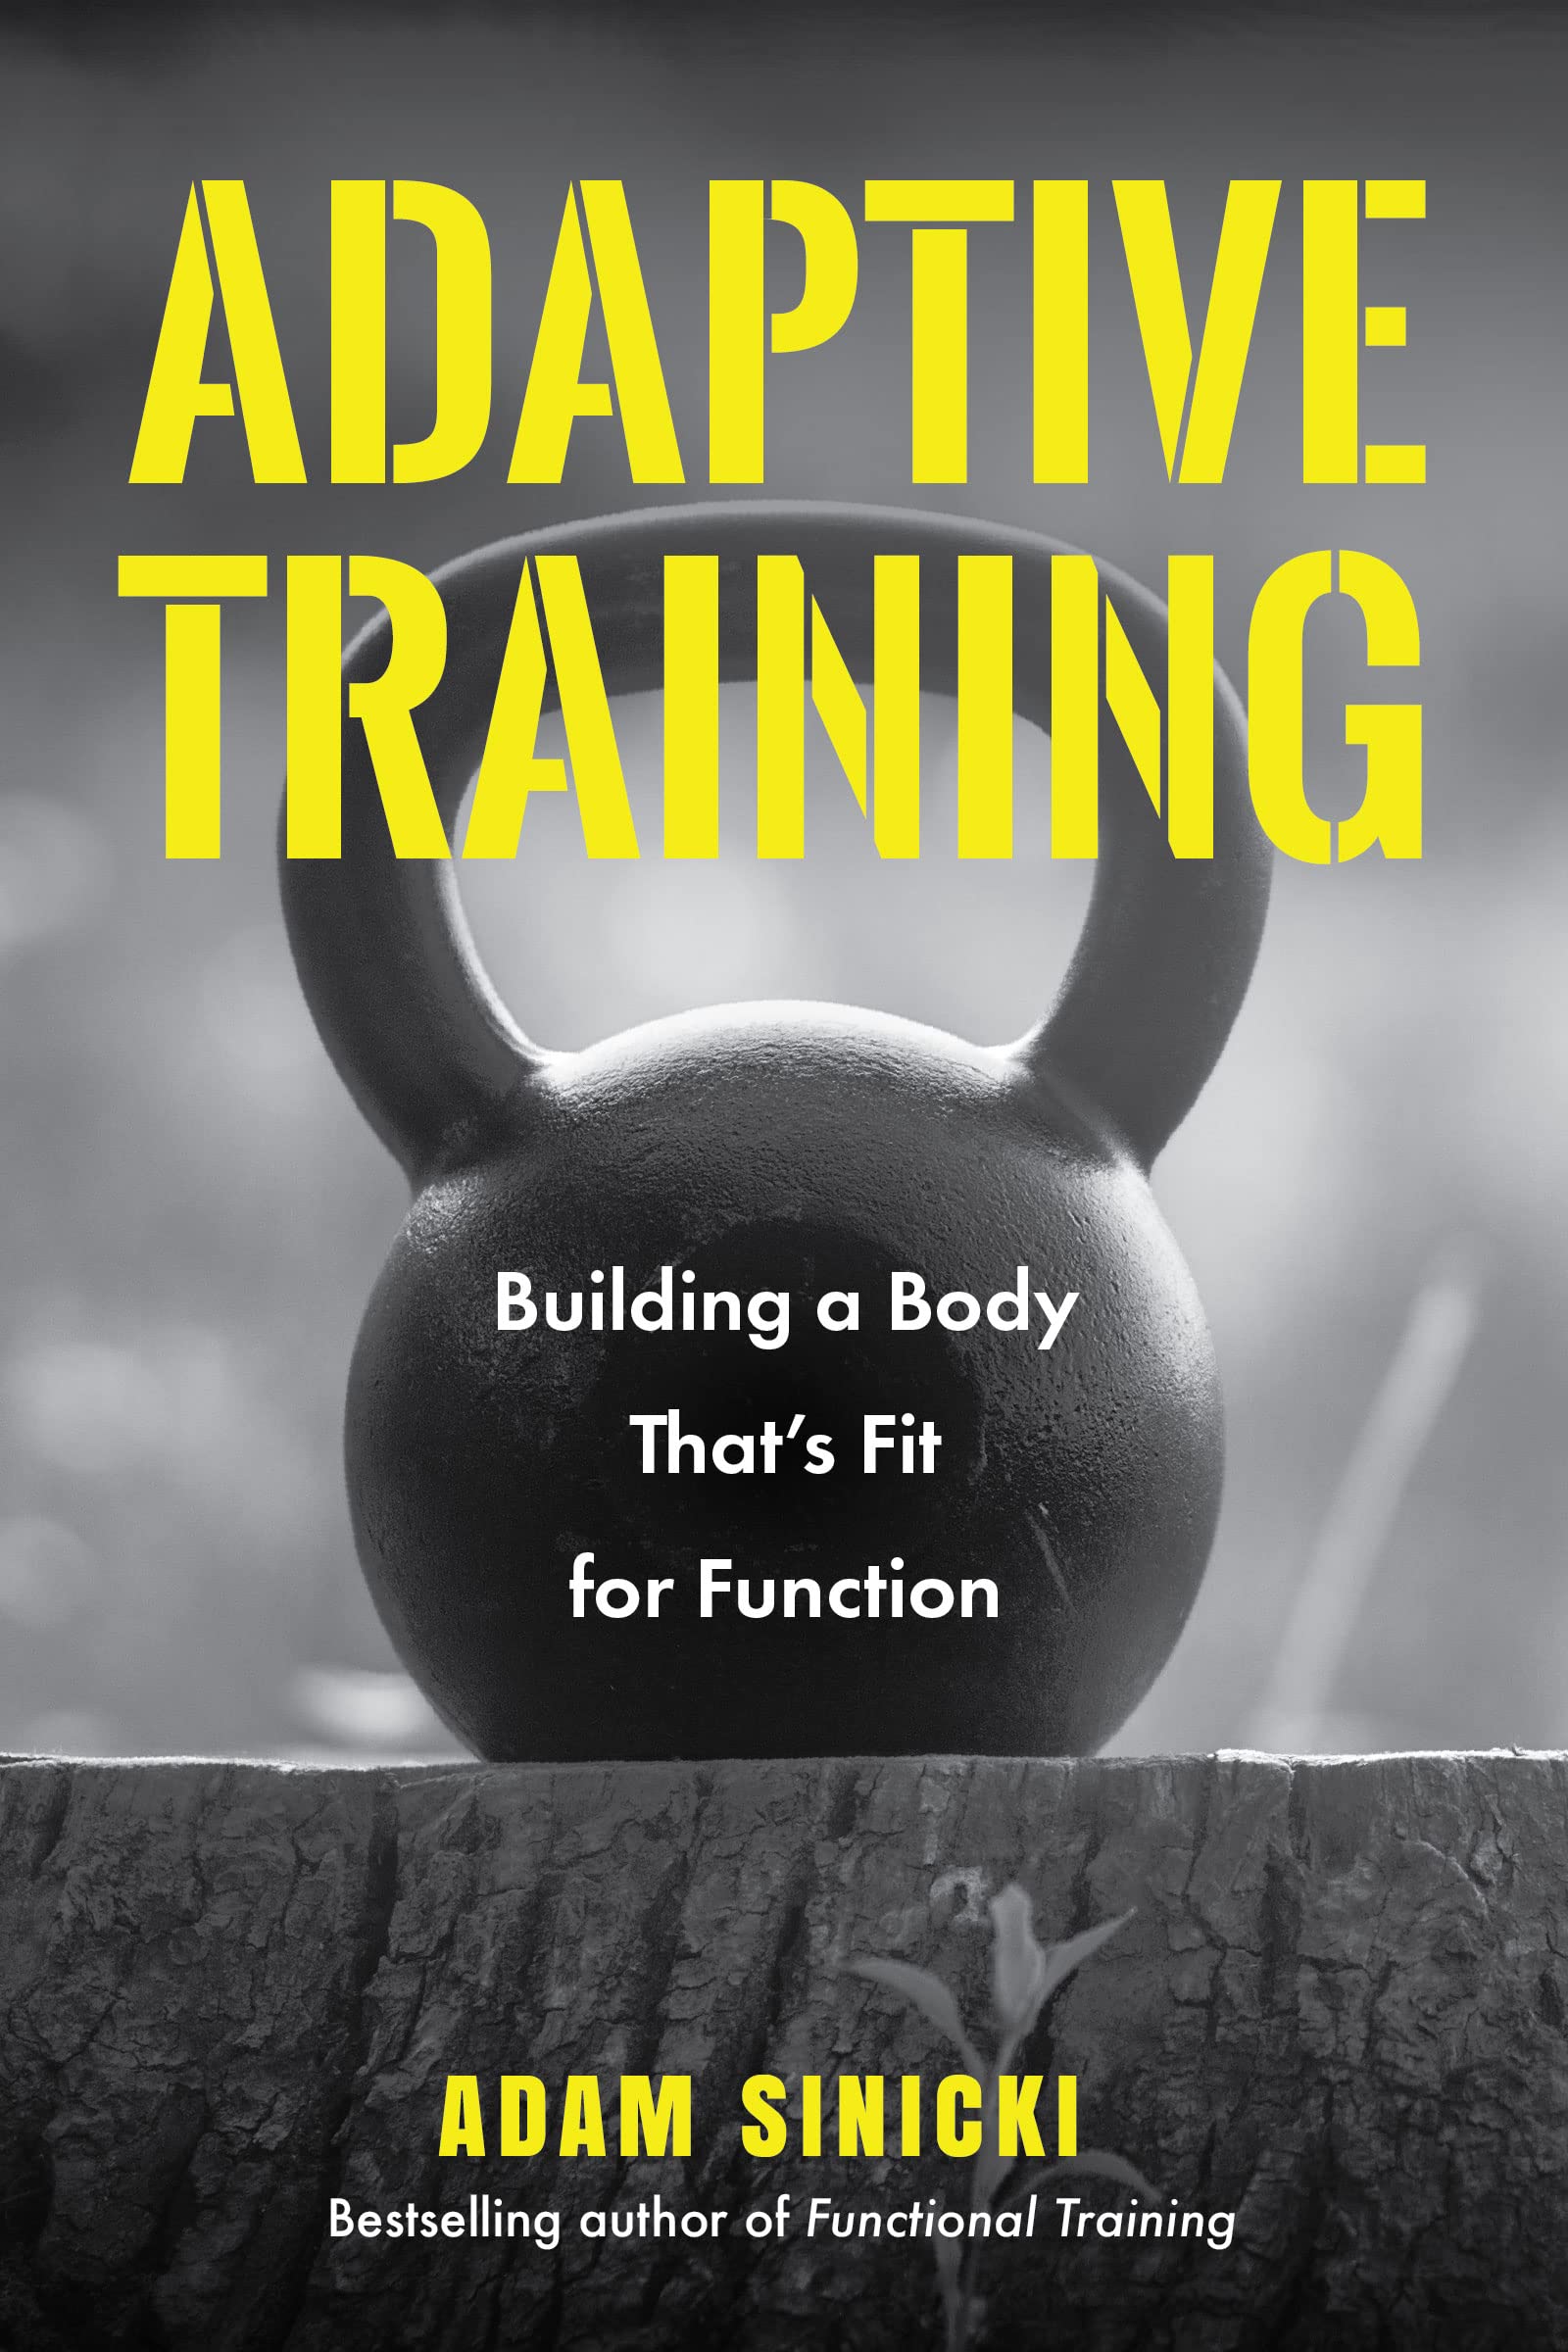 Adaptive Training: Building a Body That's Fit for Function - The